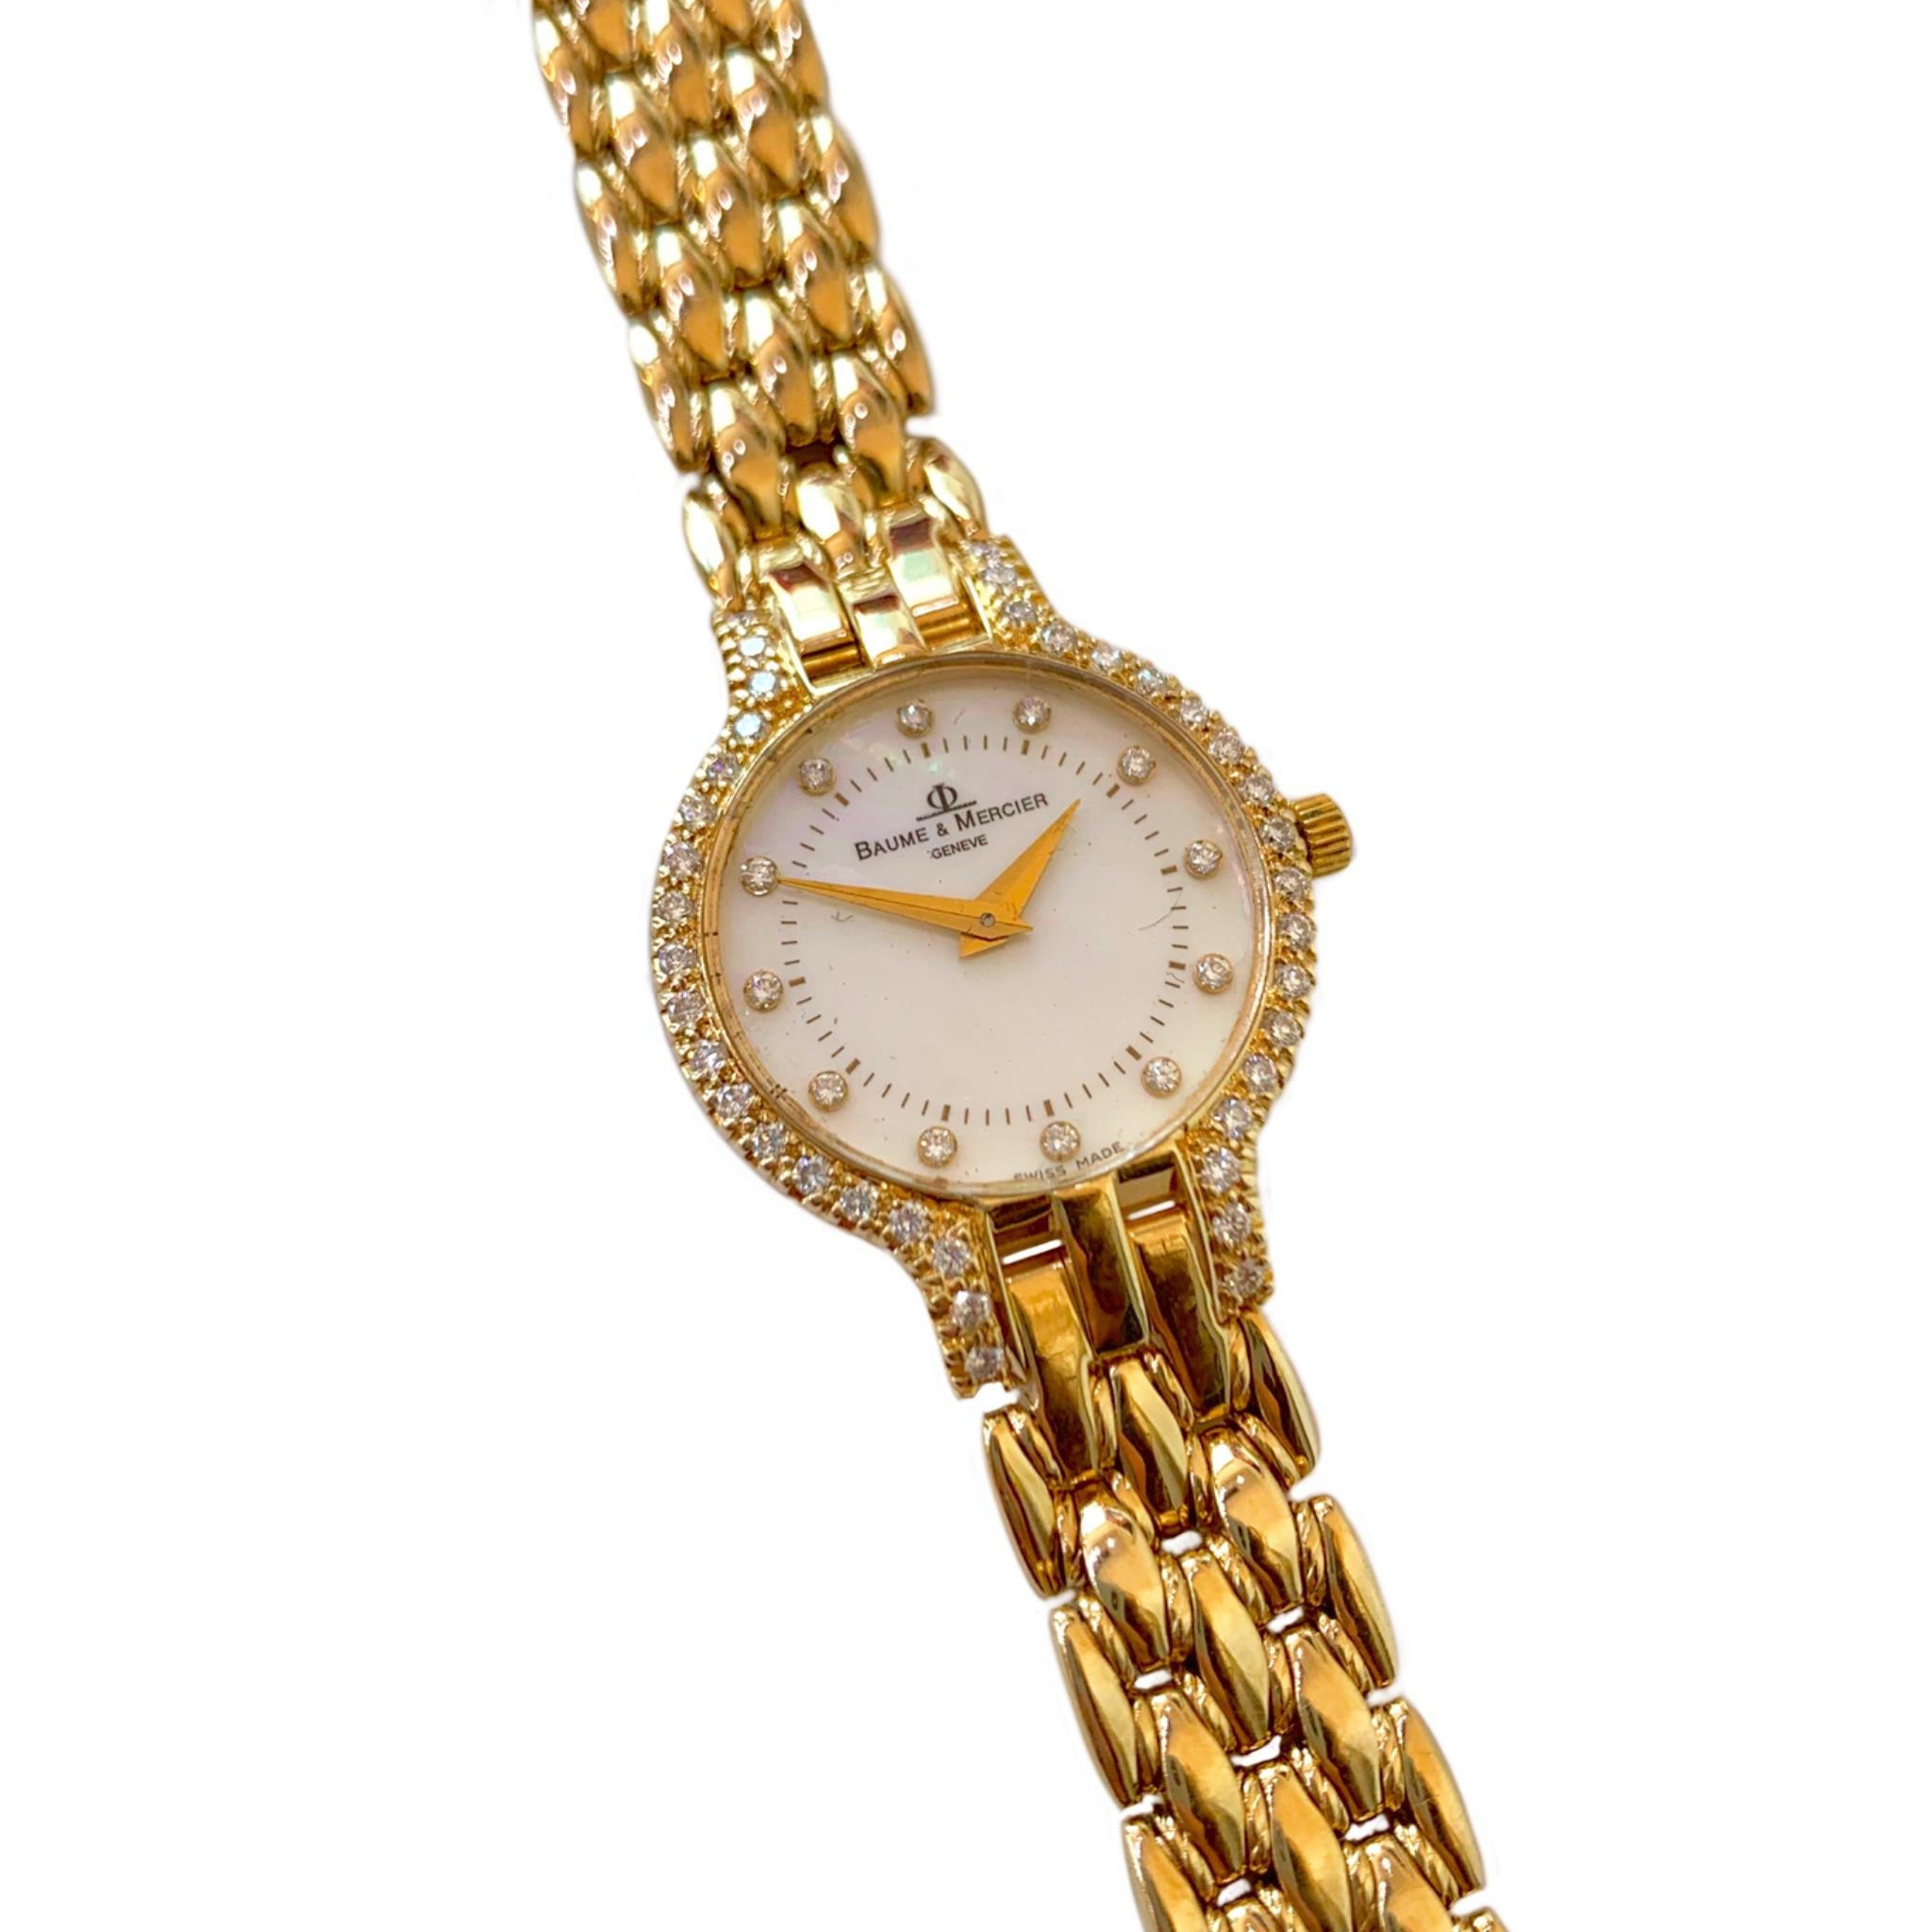 Classic Baume & Mercier 14 karat yellow gold diamond watch. The mother of pearl dial has diamond markers and is enclosed in a diamond case with a total weight of approximately .75 carats. The Swiss quartz movement is contained in a 24 mm head, which